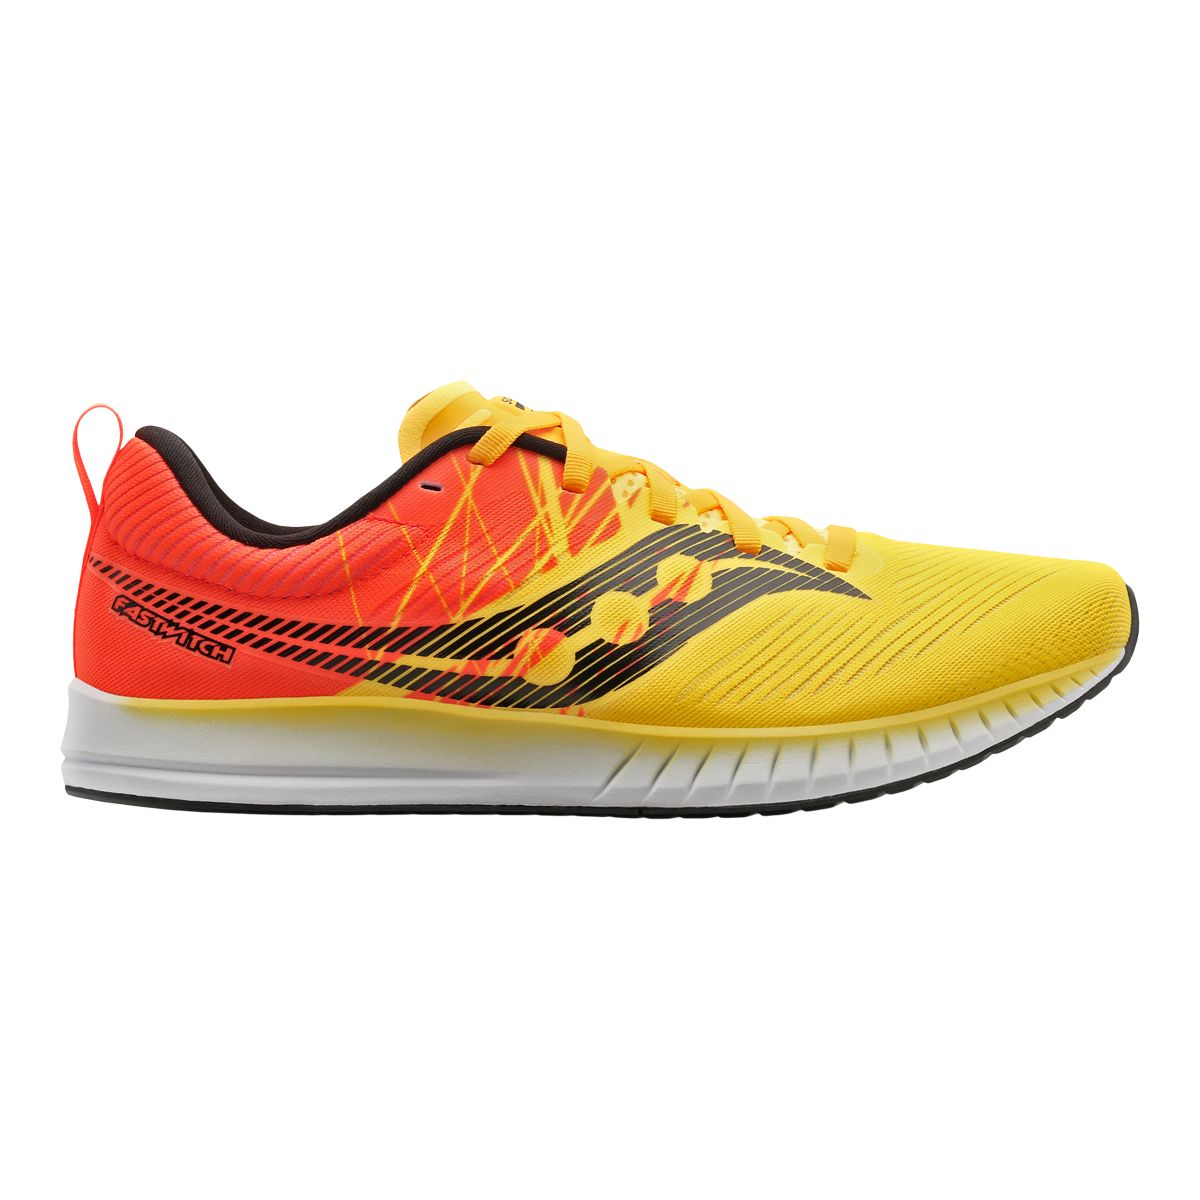 Saucony Men's Fastwitch 9 Running Shoes